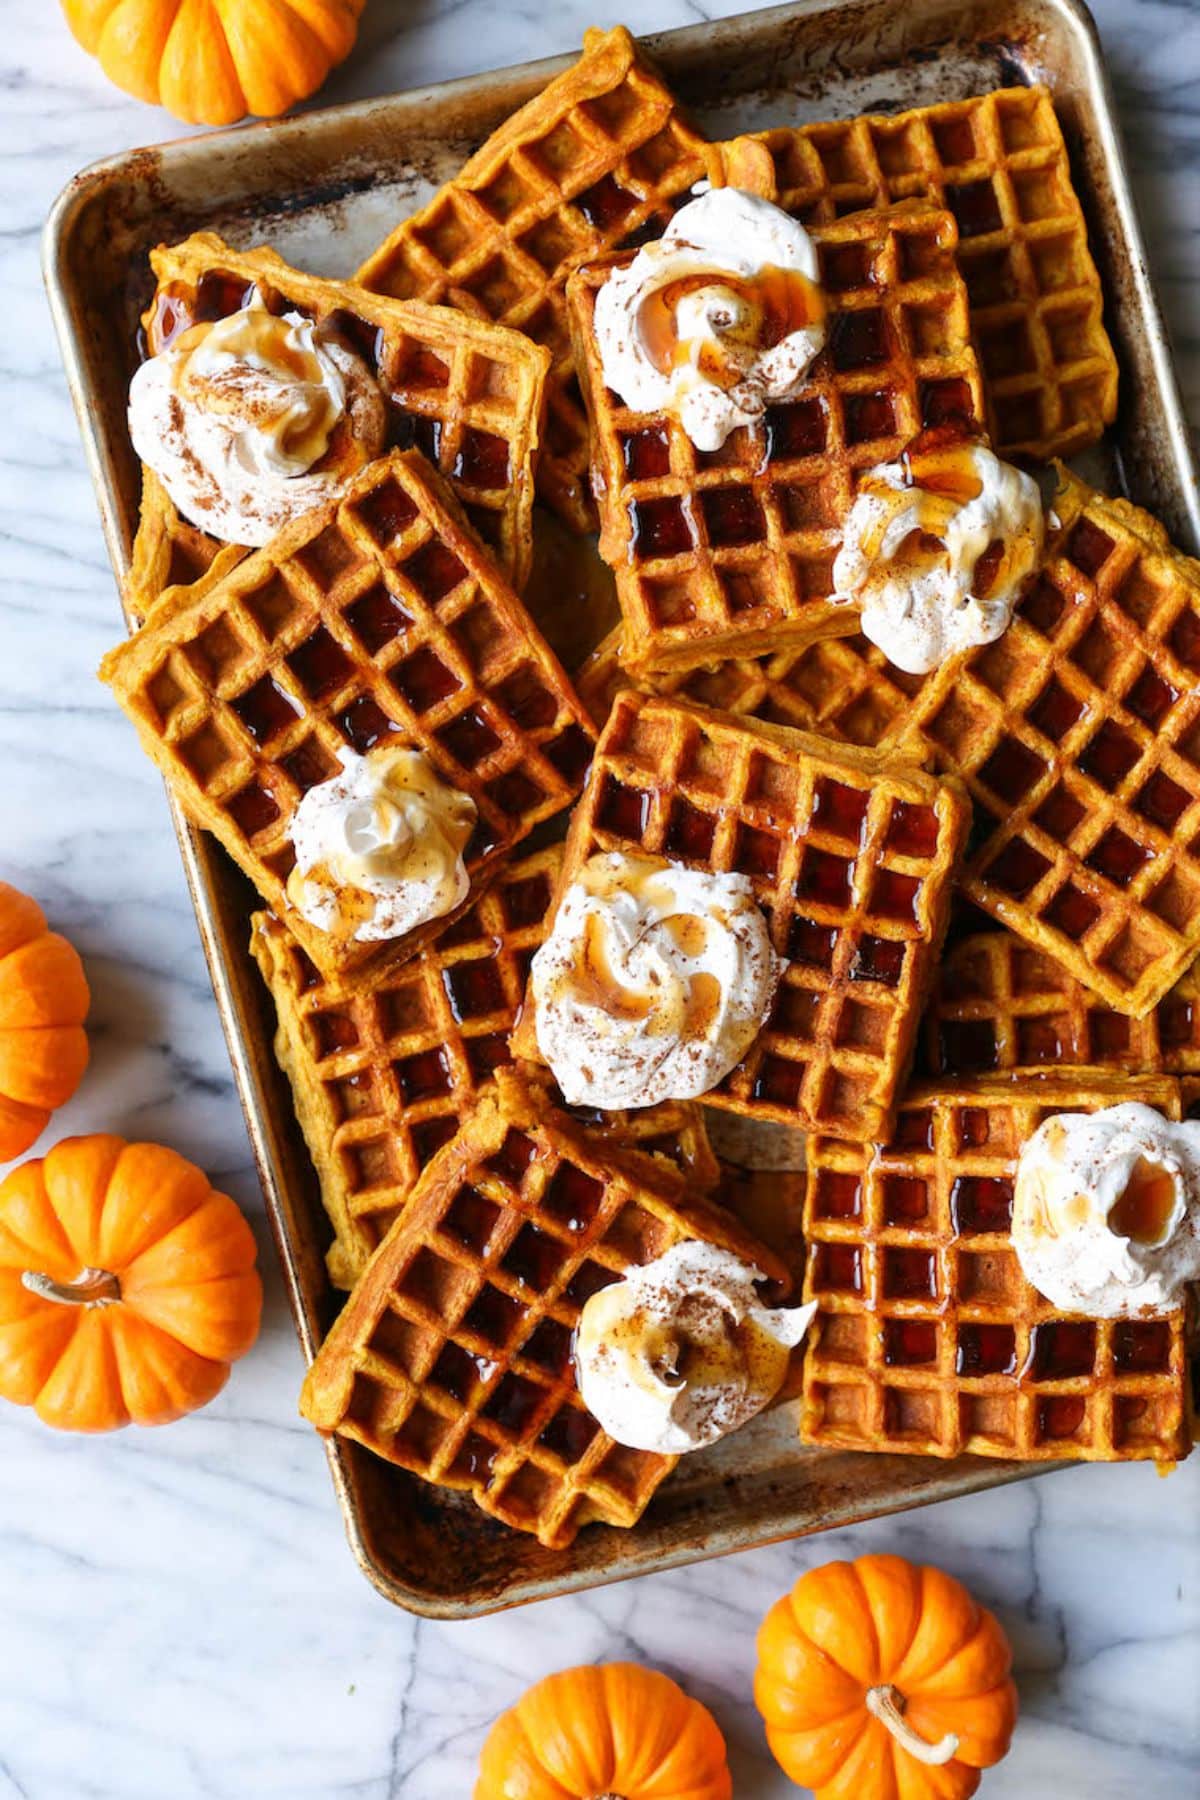 Mouth-watering pumpkin spice waffles on a baking tray.